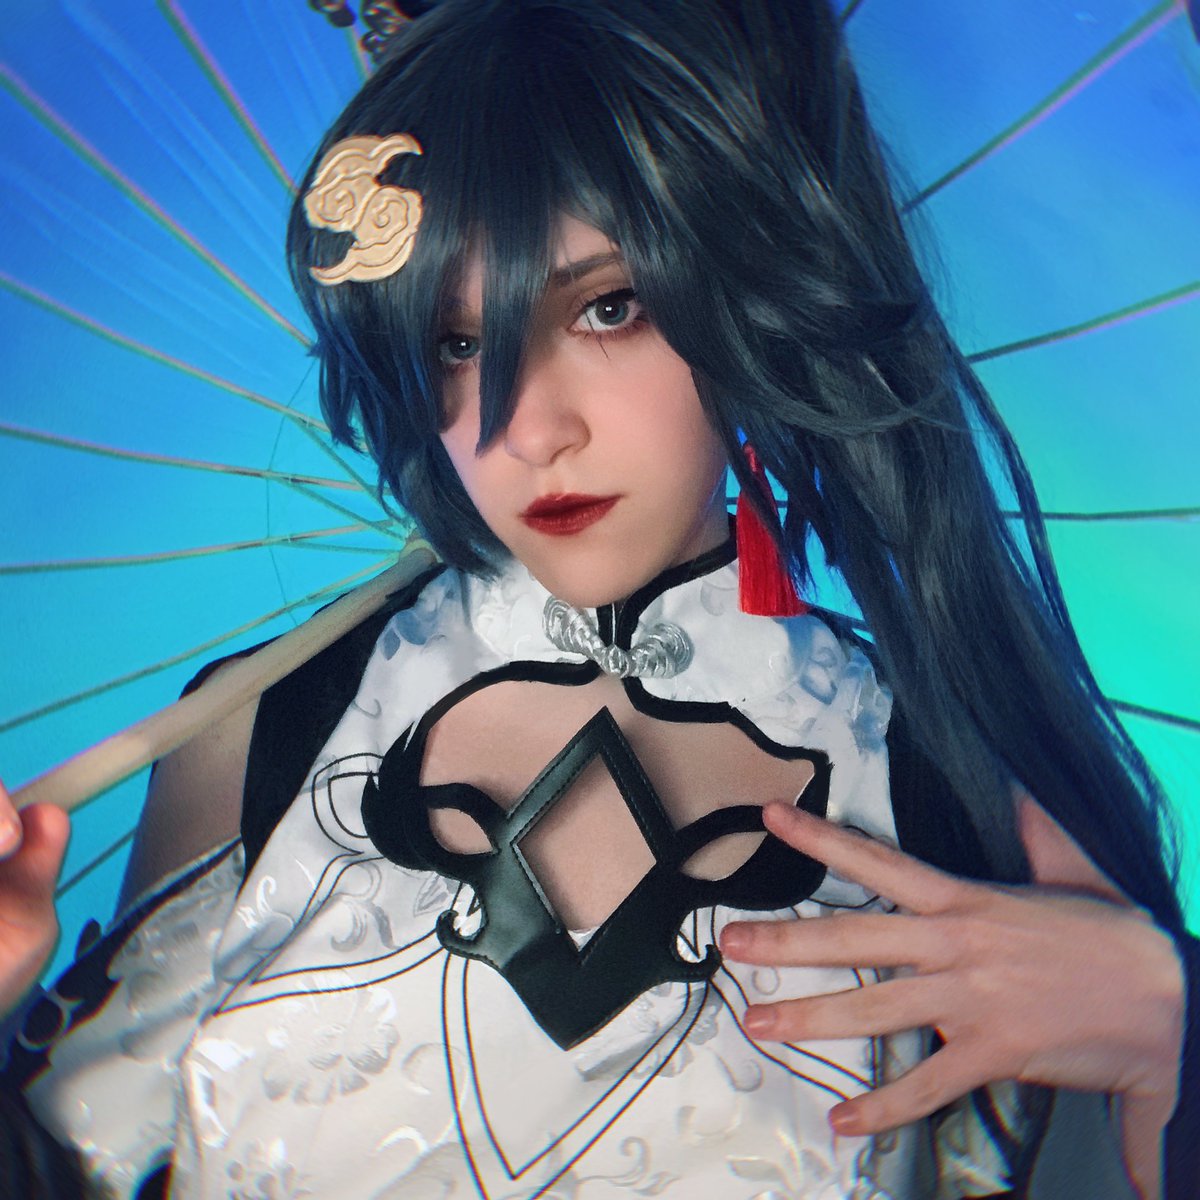 'No mercy for the corrupted'
#fuhua #fuhuacosplay #cosplay #honkaiimpactcosplay #honkaiimpact3rd #azureempyrea